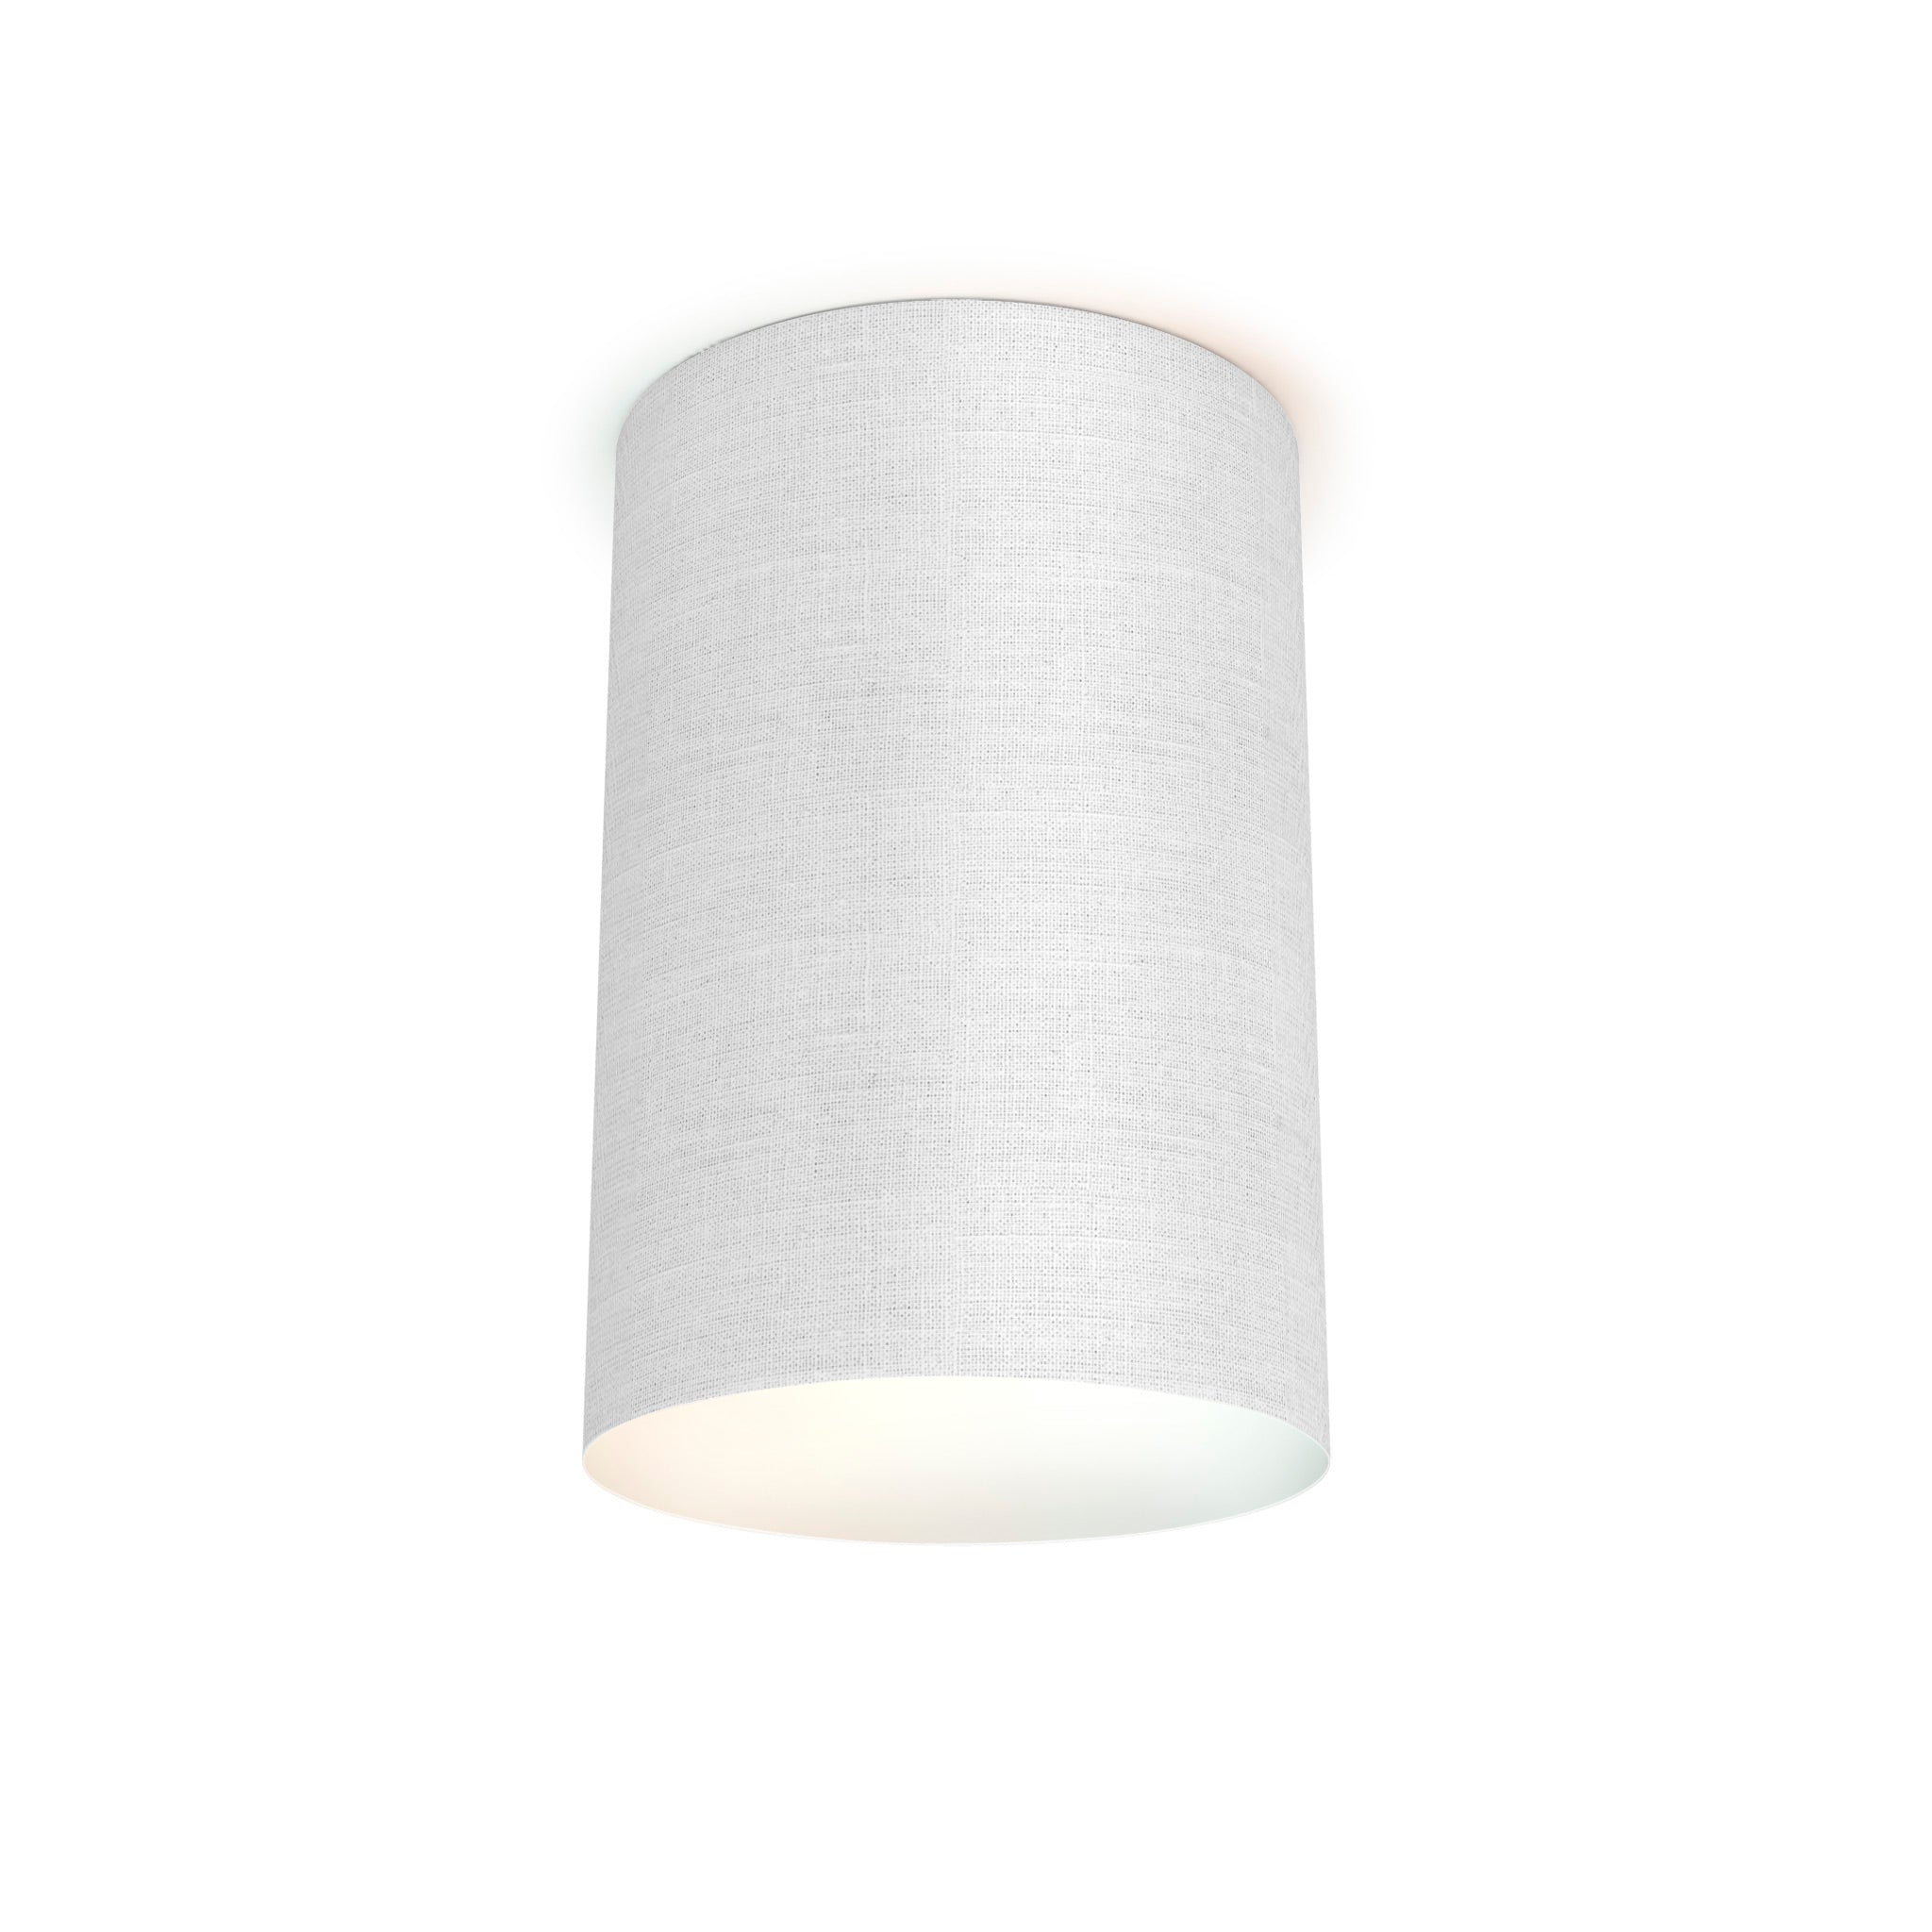 The Lily Flush Mount from Seascape Fixtures in linen, white color.